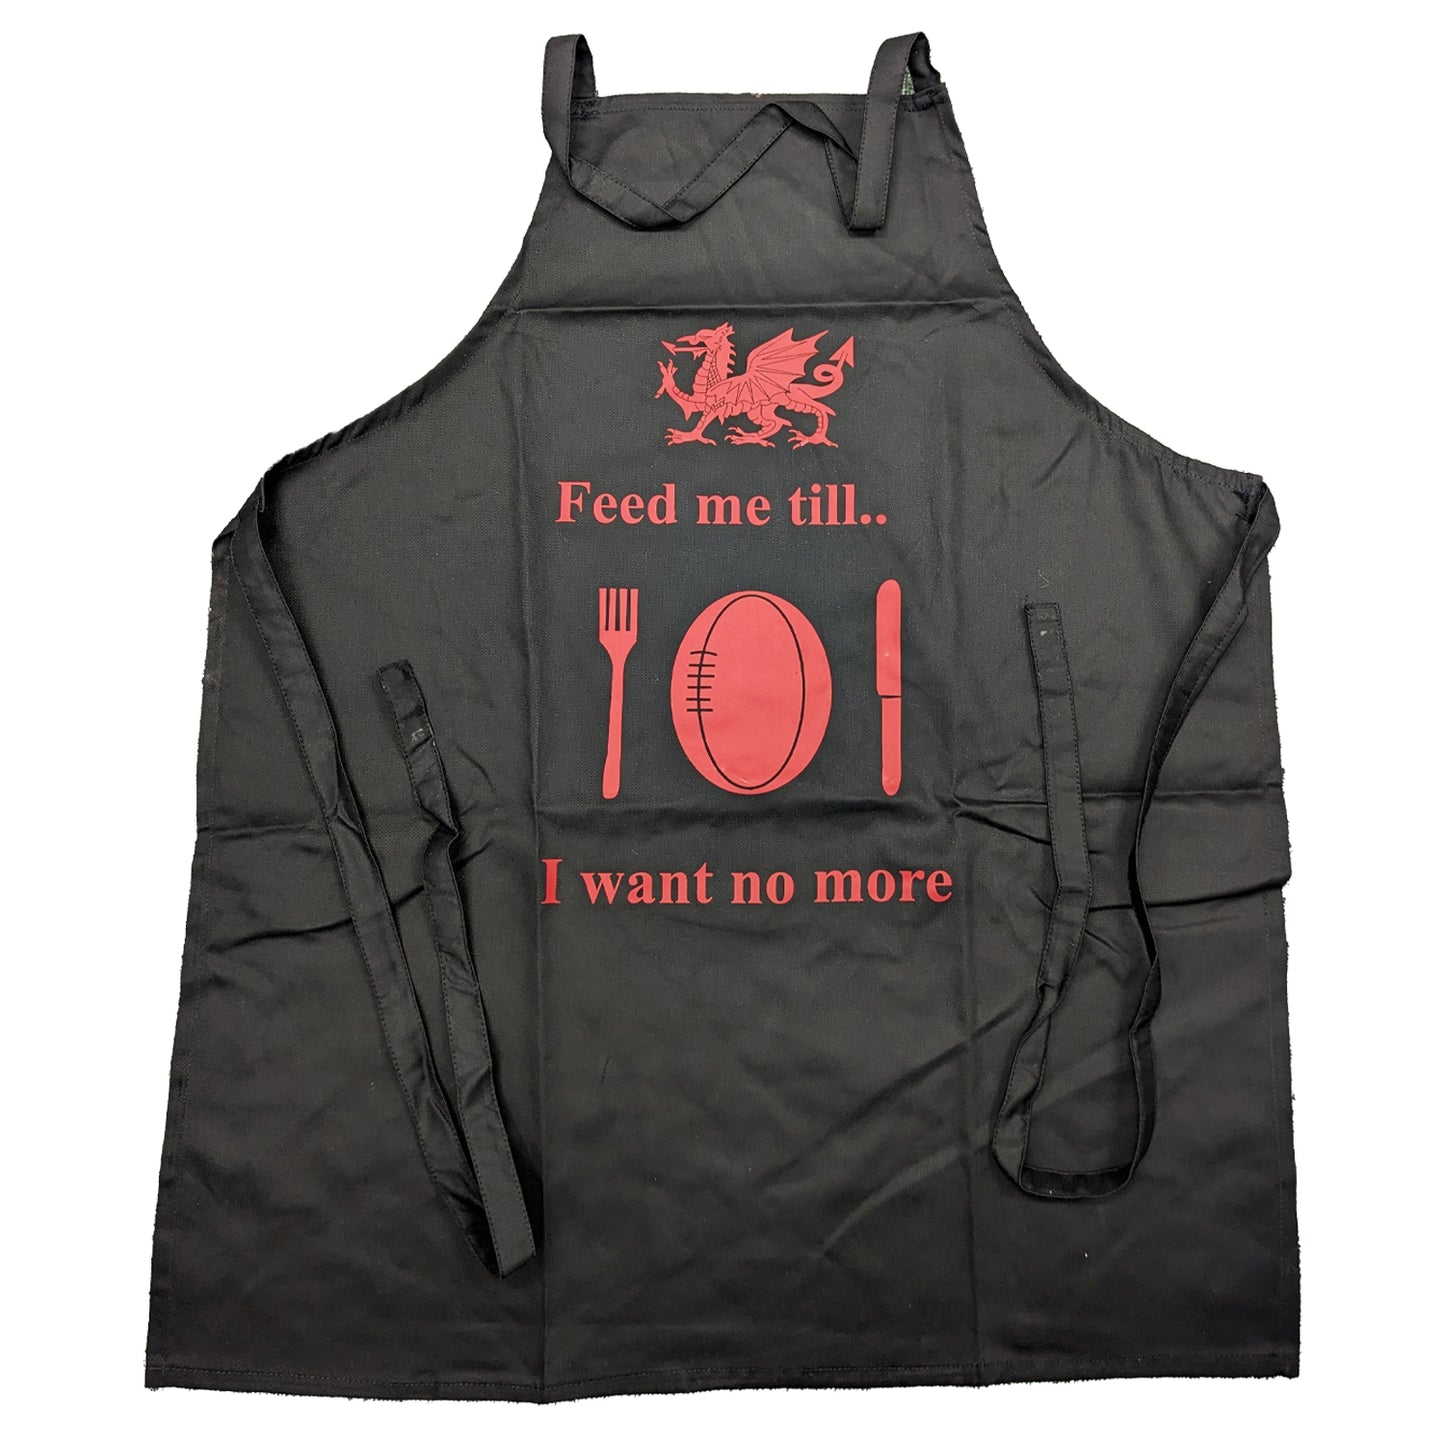 Welsh Apron - Feed Me Till I Want No More